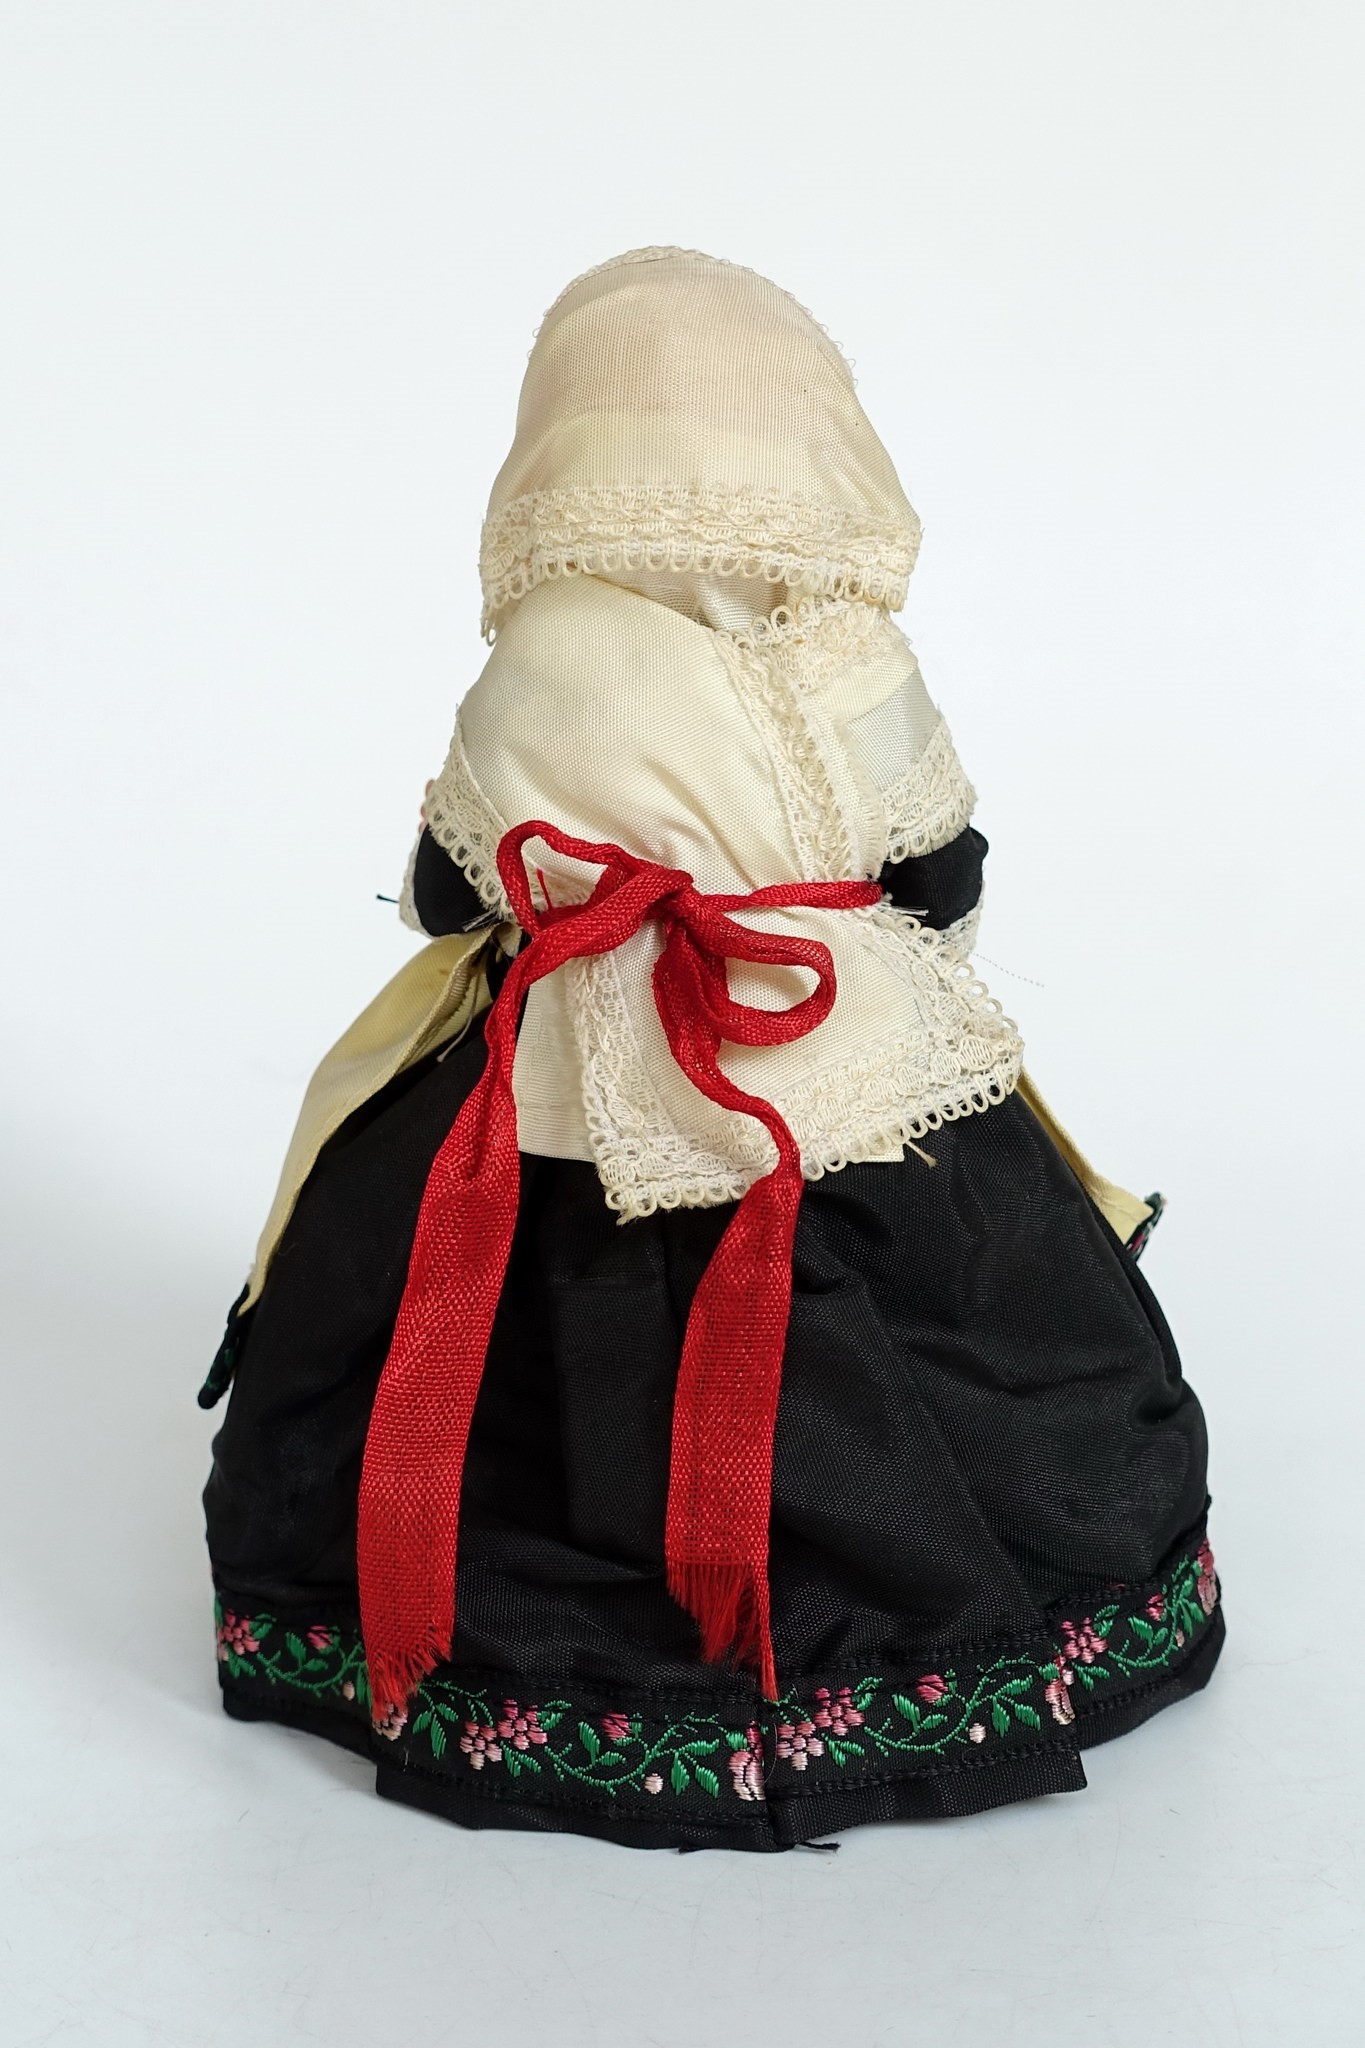 Denmark Doll Laeso | National costume dolls from all over the world